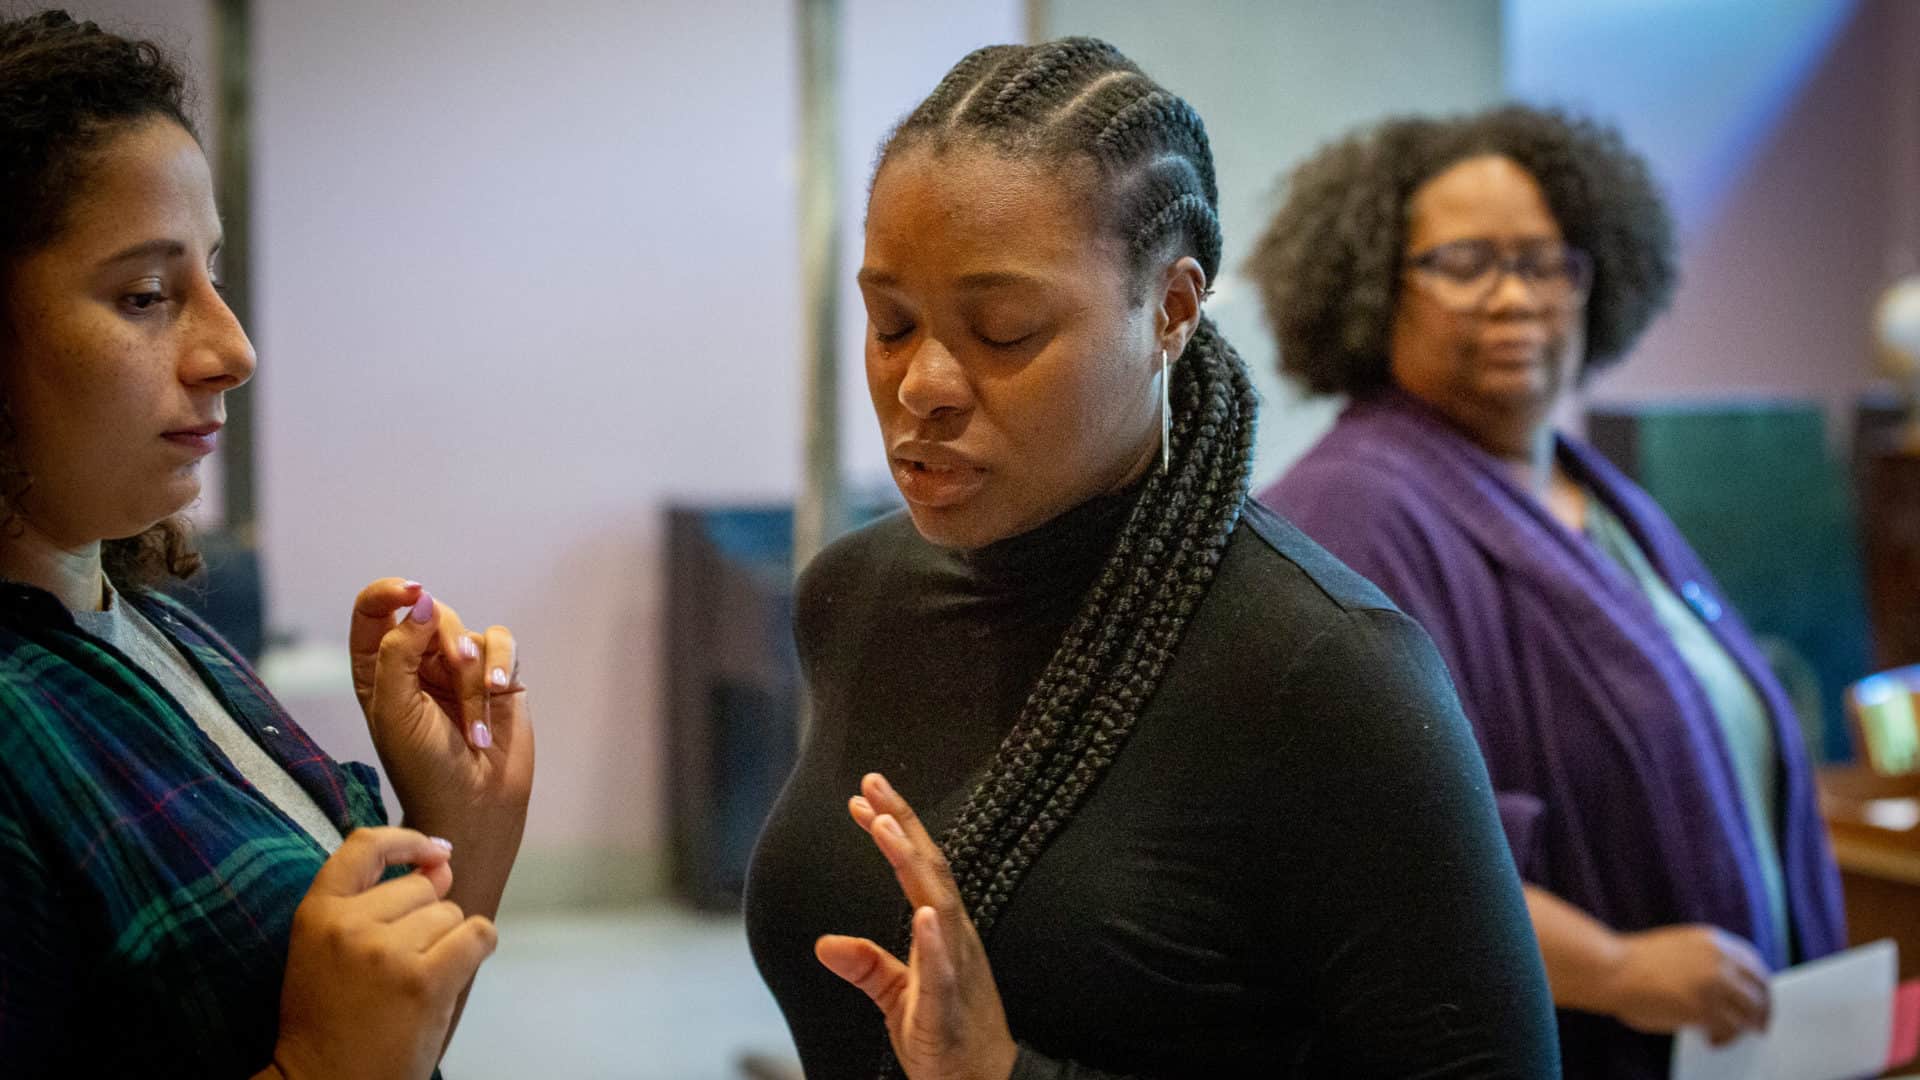 Alicia M. P. Nelson listens as Kyra Davis makes a strong point and MaConnia Chesser takes in the conversation in Cadillac Crew with WAM Theatre. Press photo courtesy of the theater